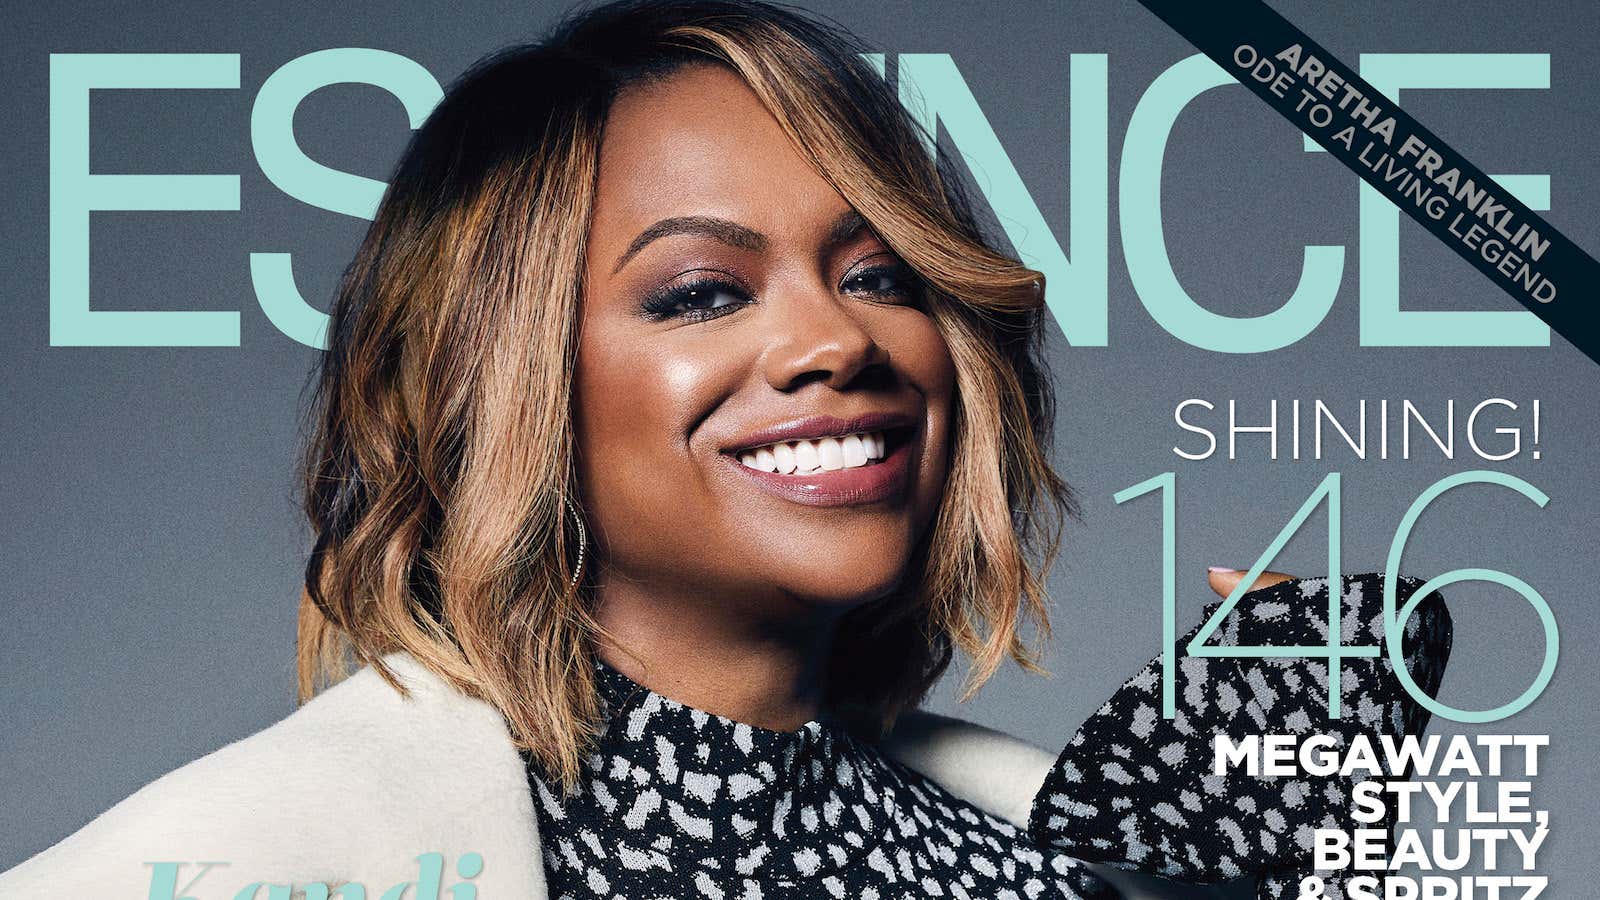 Essence covers African-American beauty and style.